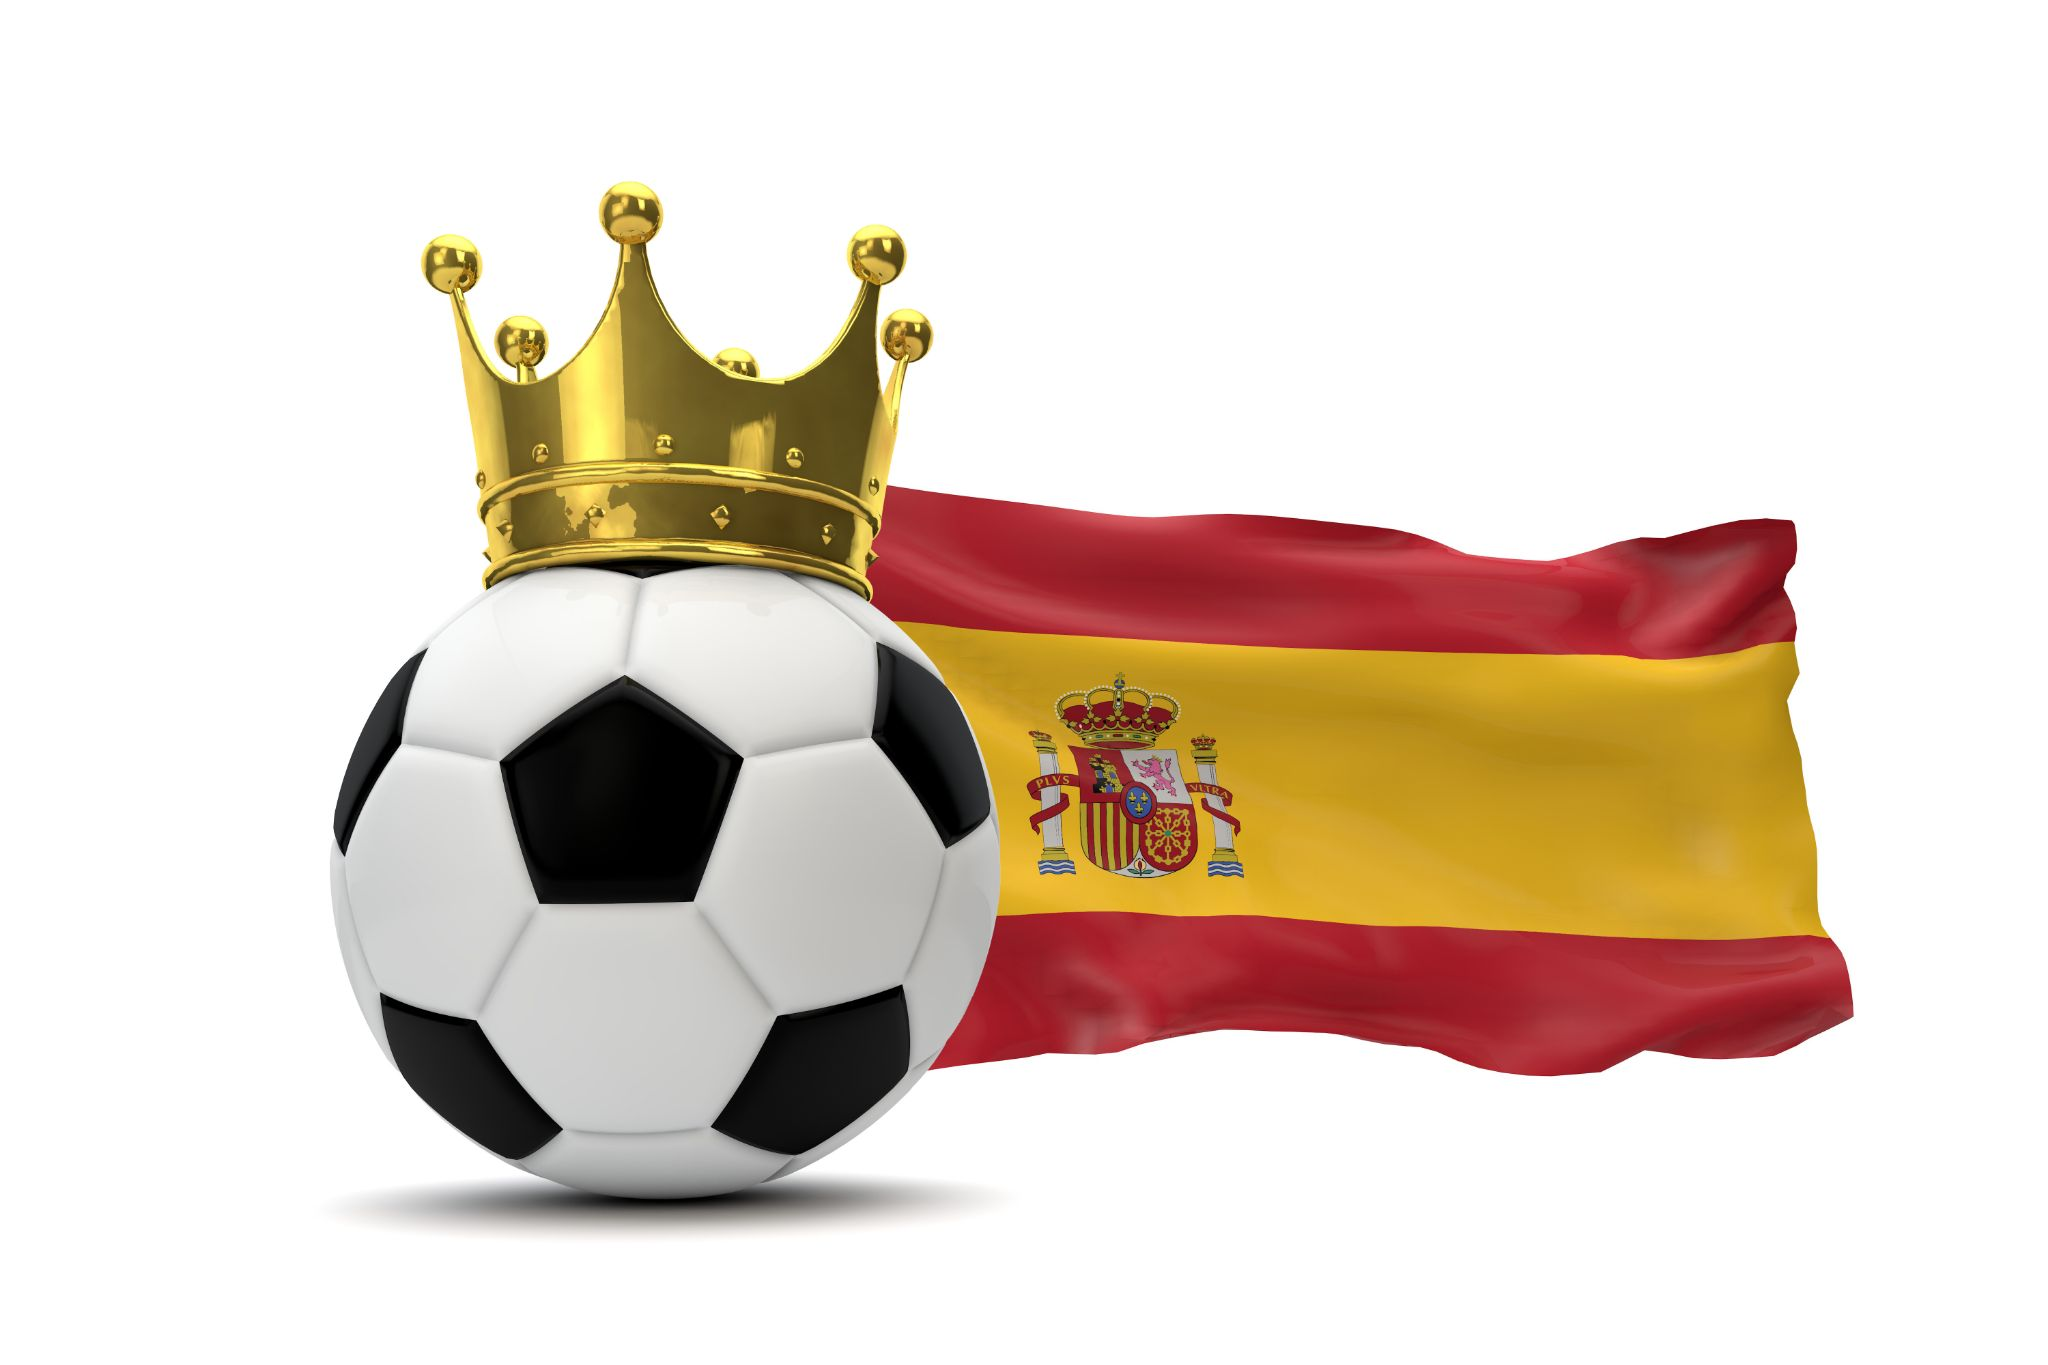 Crown on a football next to Spain’s flag